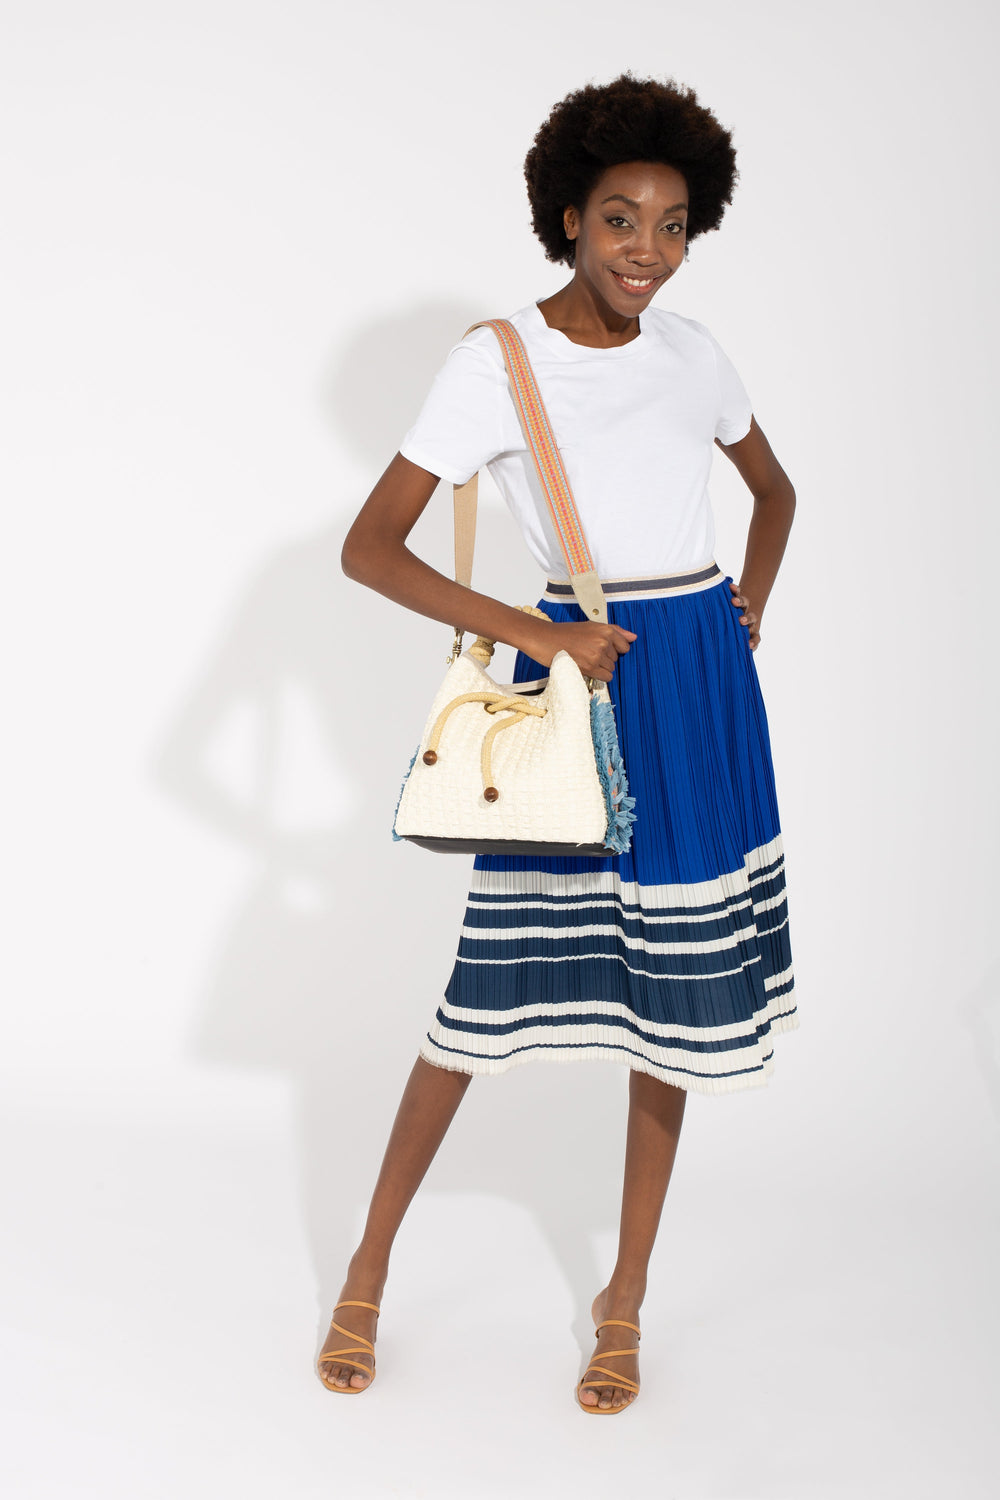 Woman in white t-shirt and blue skirt with handbag posing against white background